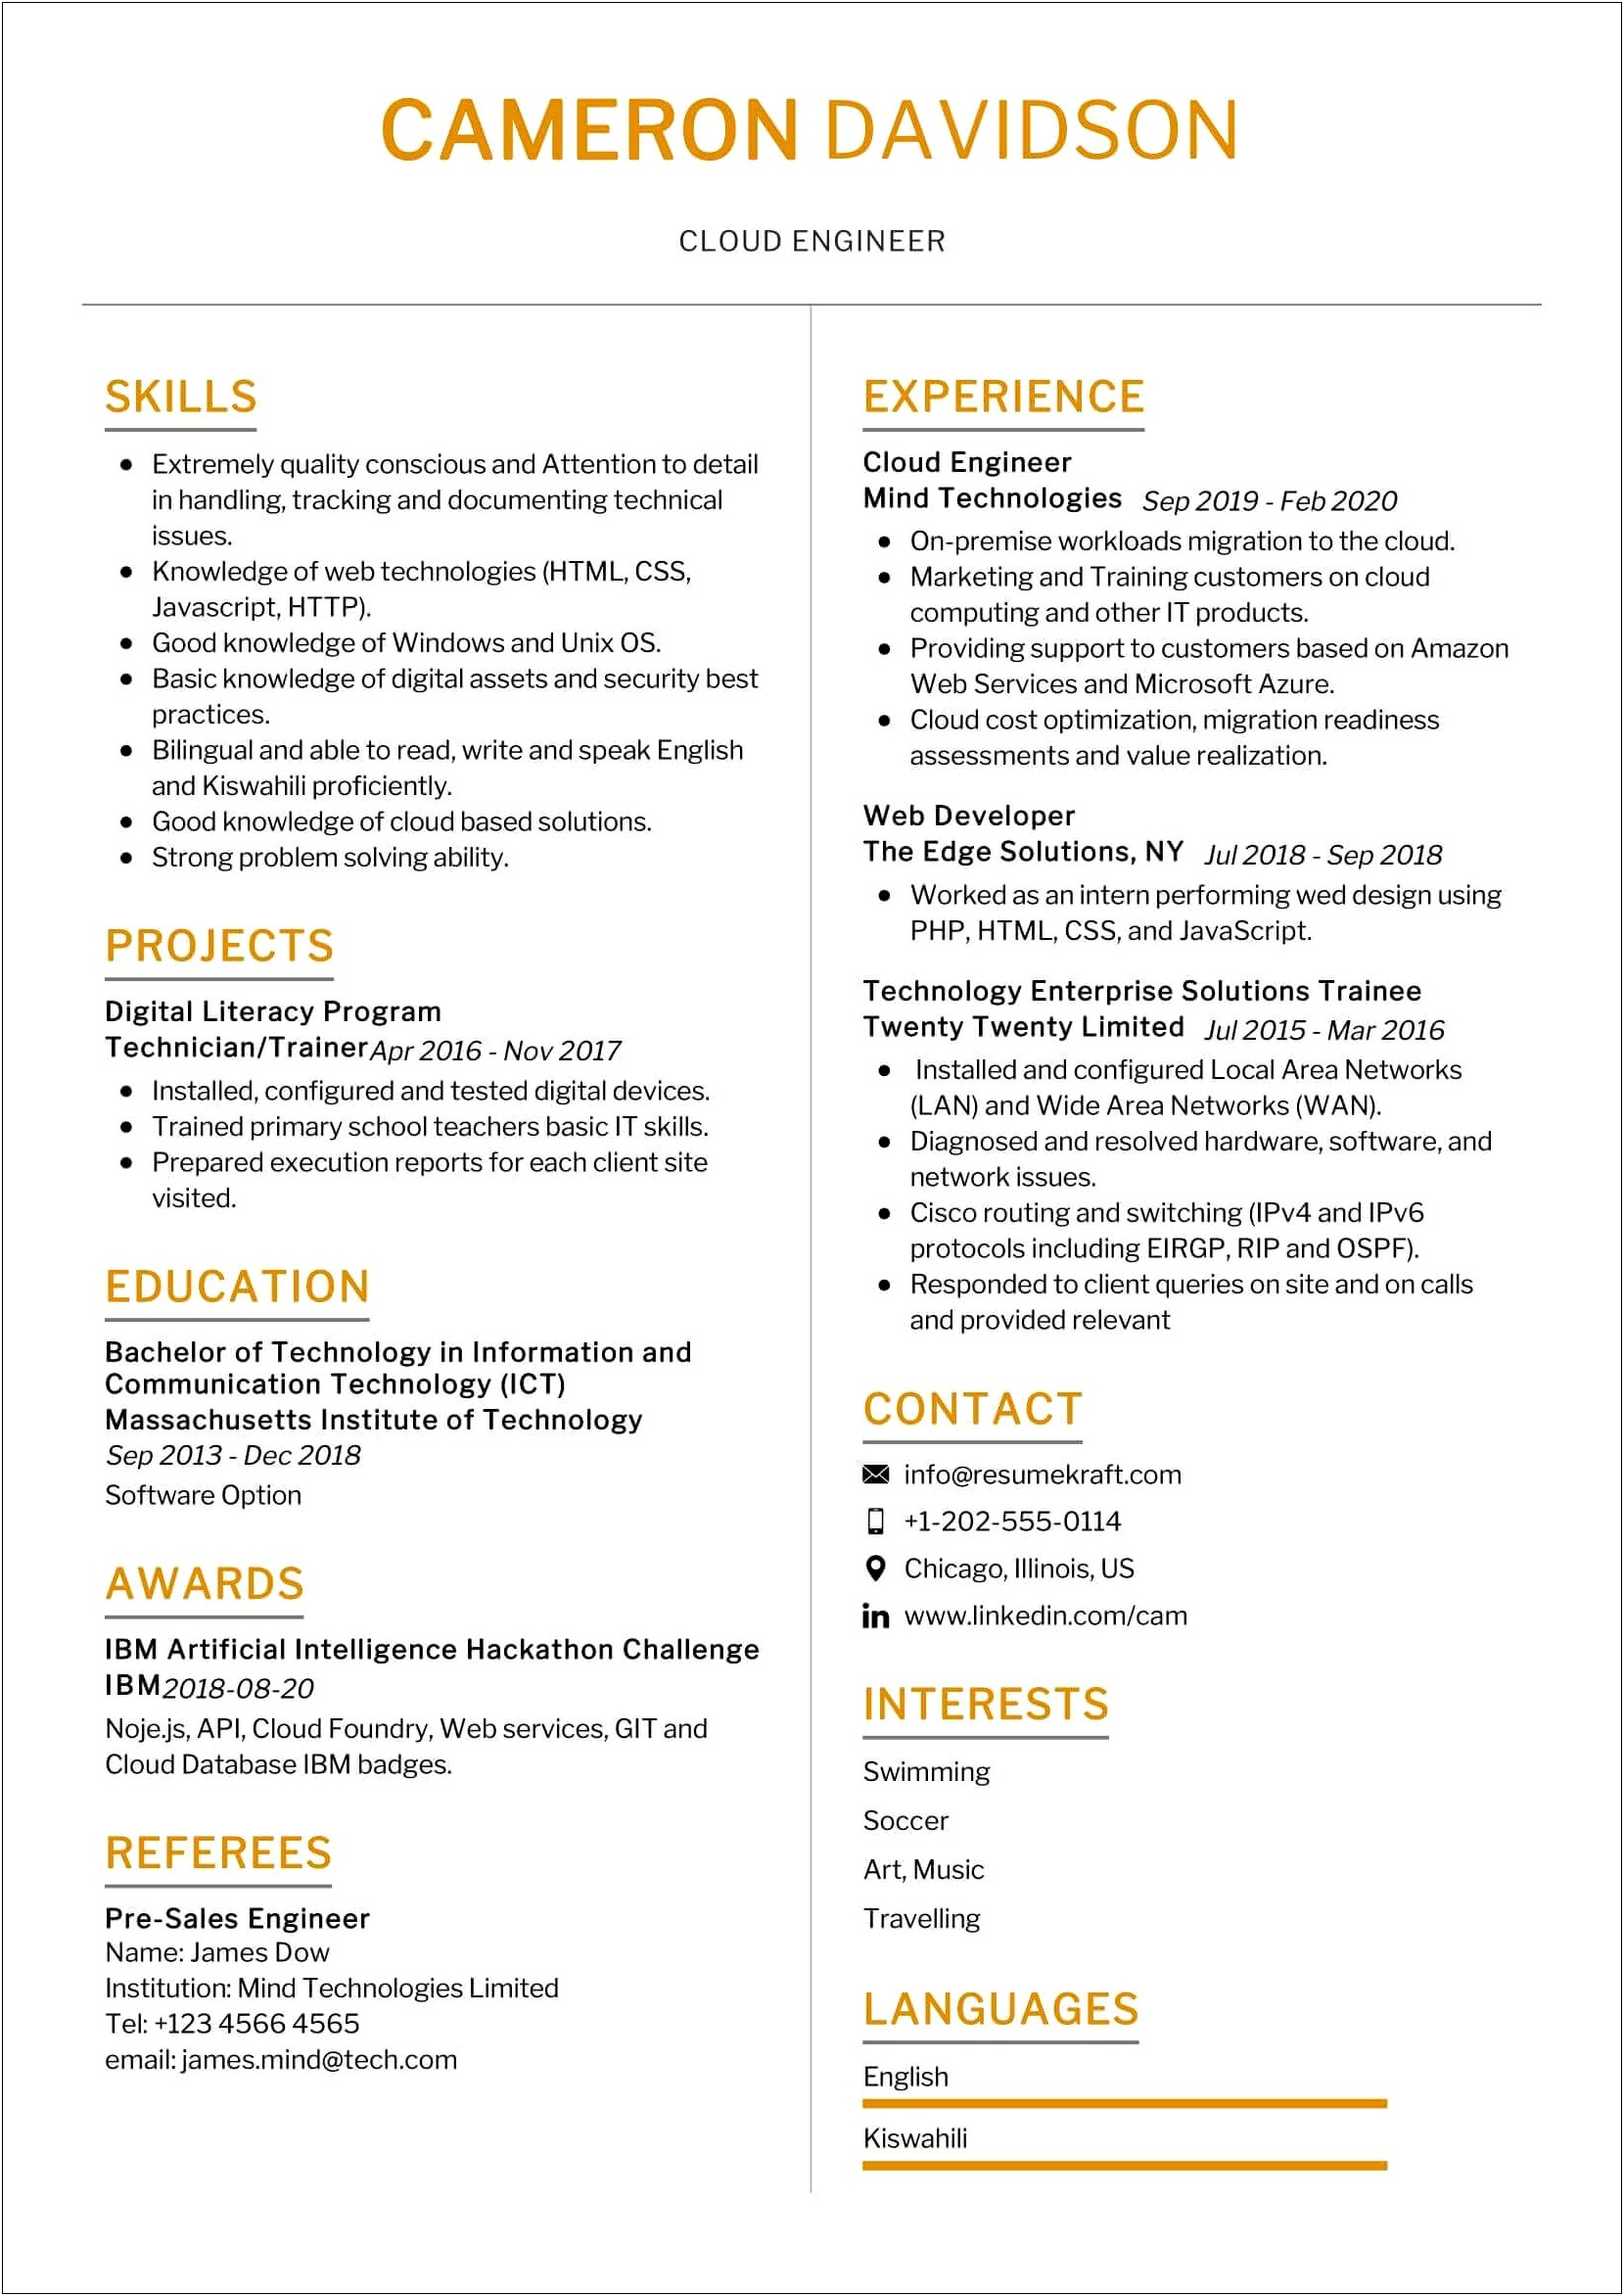 Read Example Of Well Written Resume